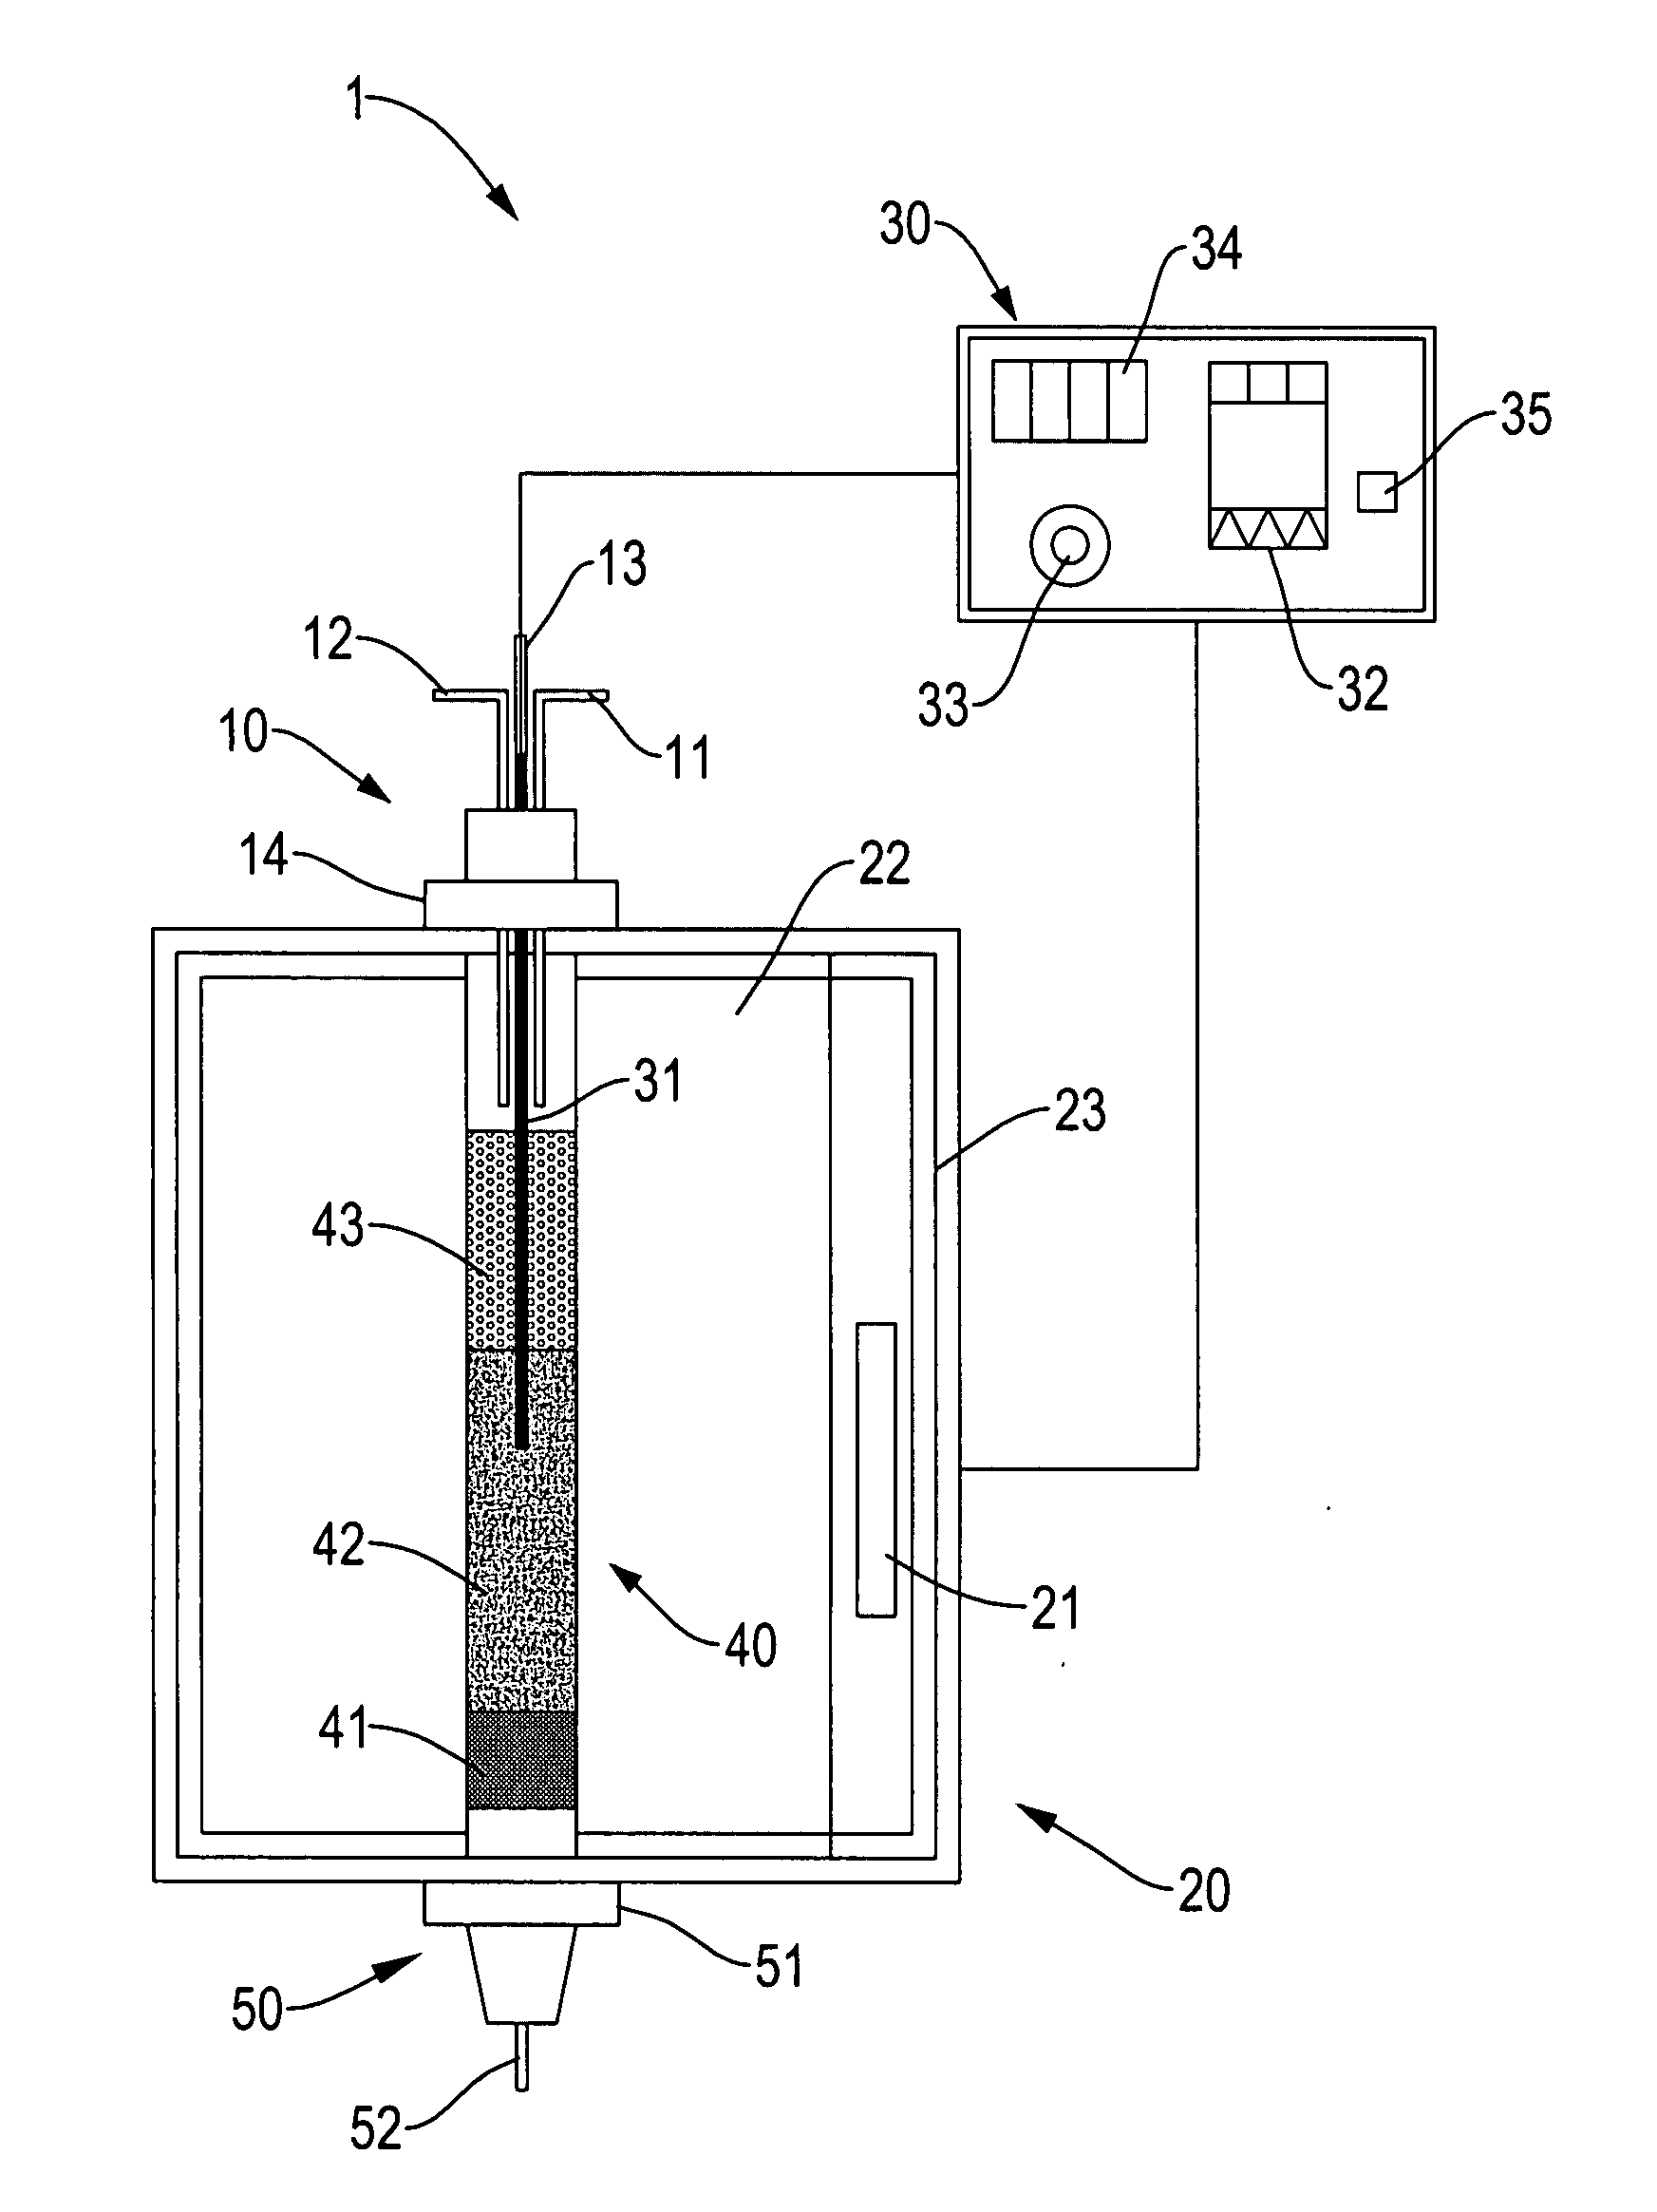 Apparatus for and method of producing hydrogen using microwaves